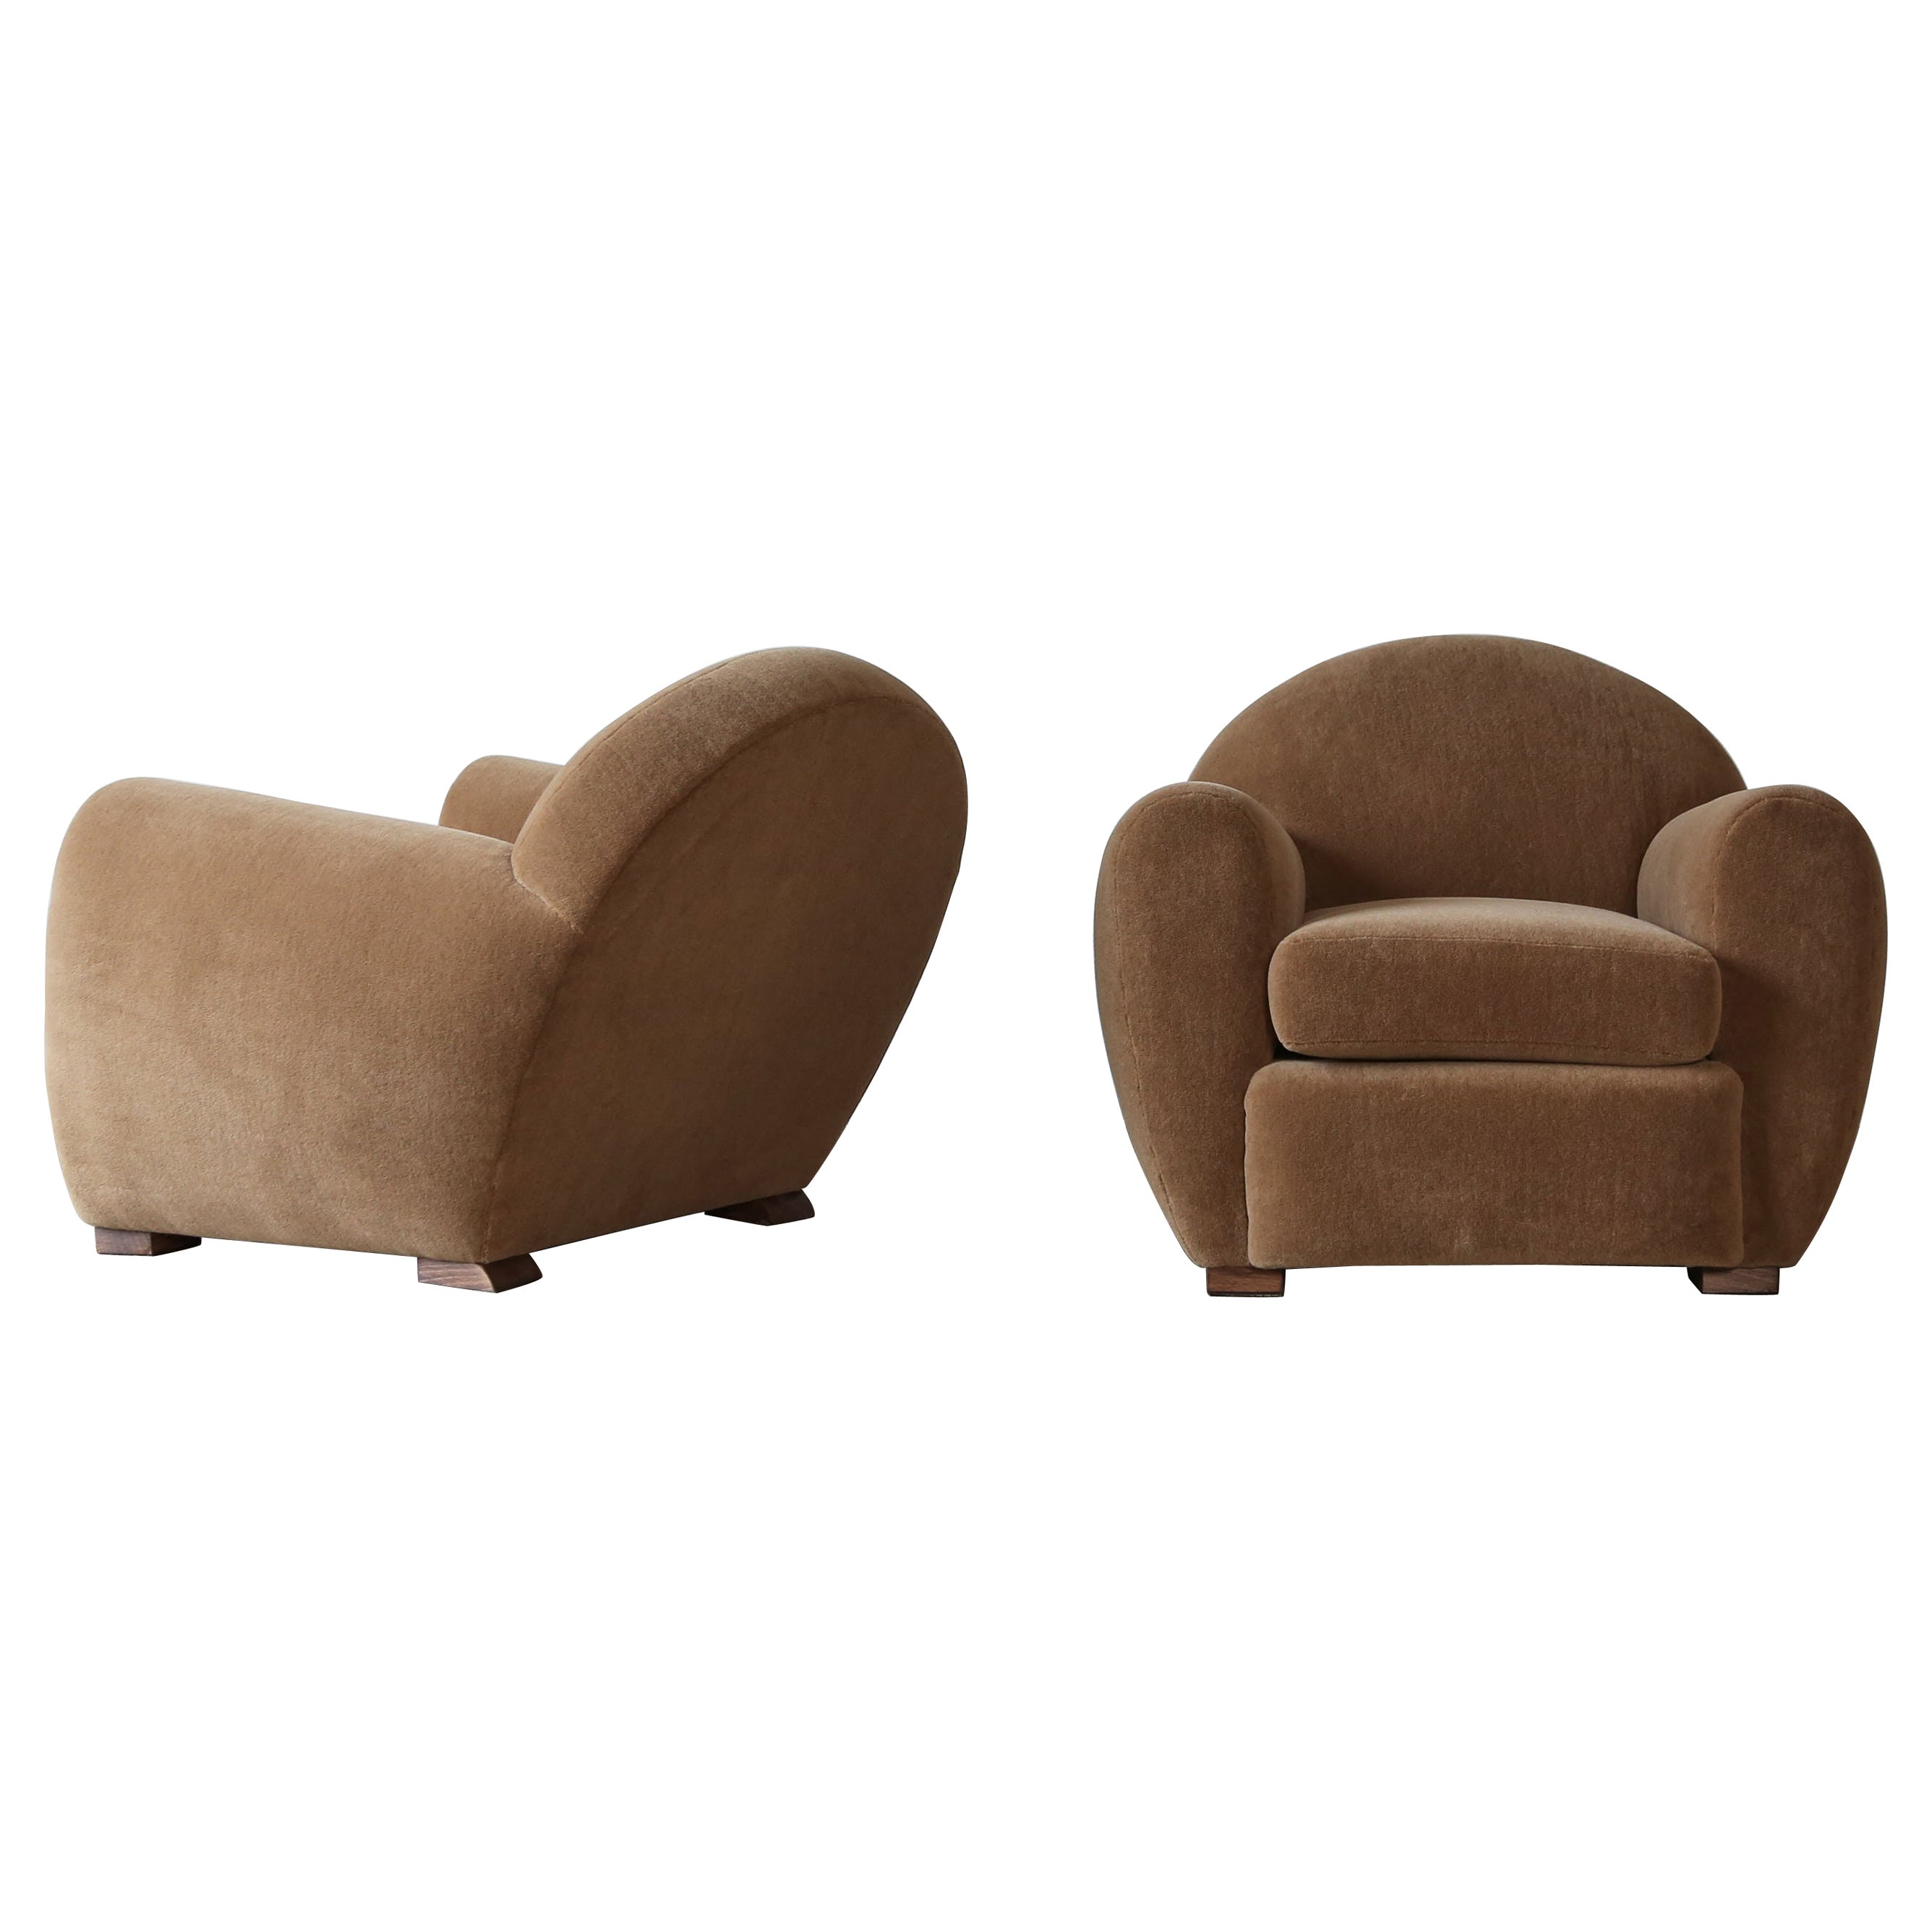 Pair of Round Leaning Club Chairs, Upholstered in Pure Alpaca For Sale